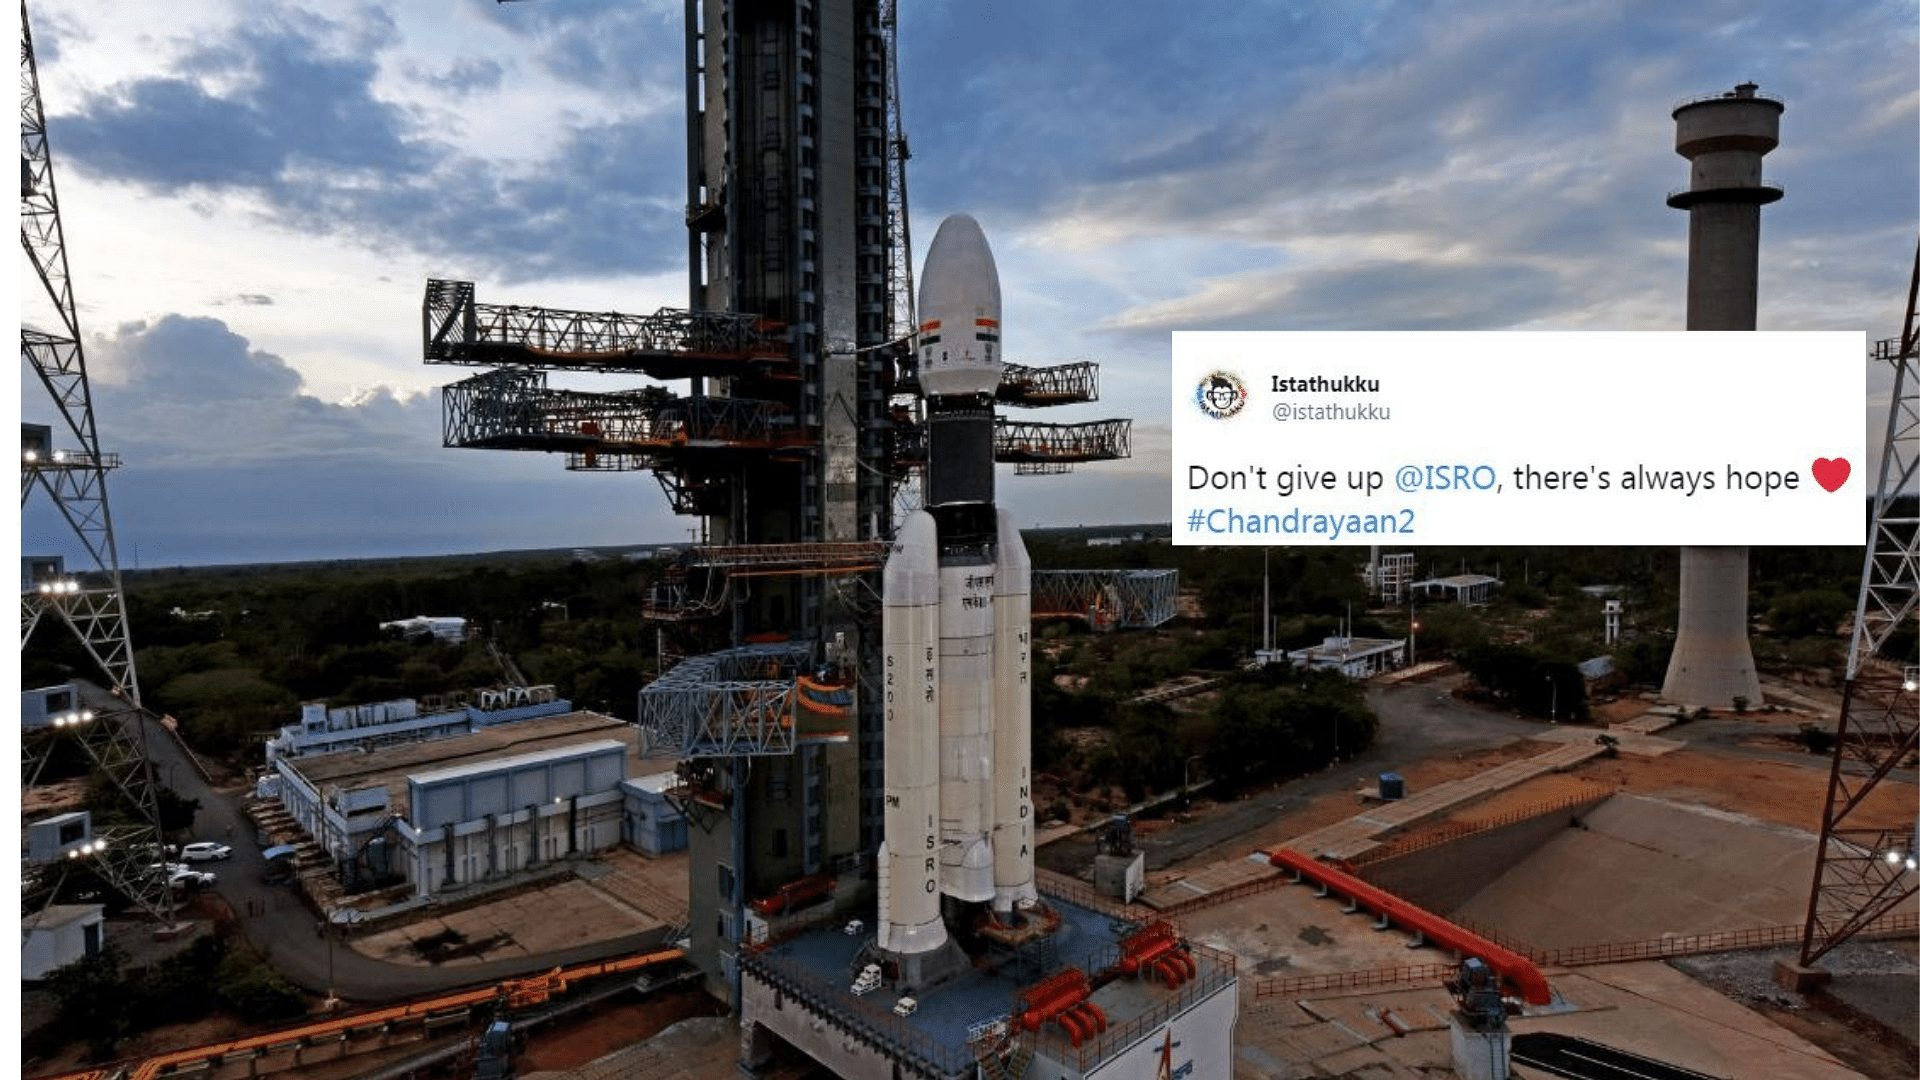 The launch of Chandrayaan-2 got called off due to technical snag.